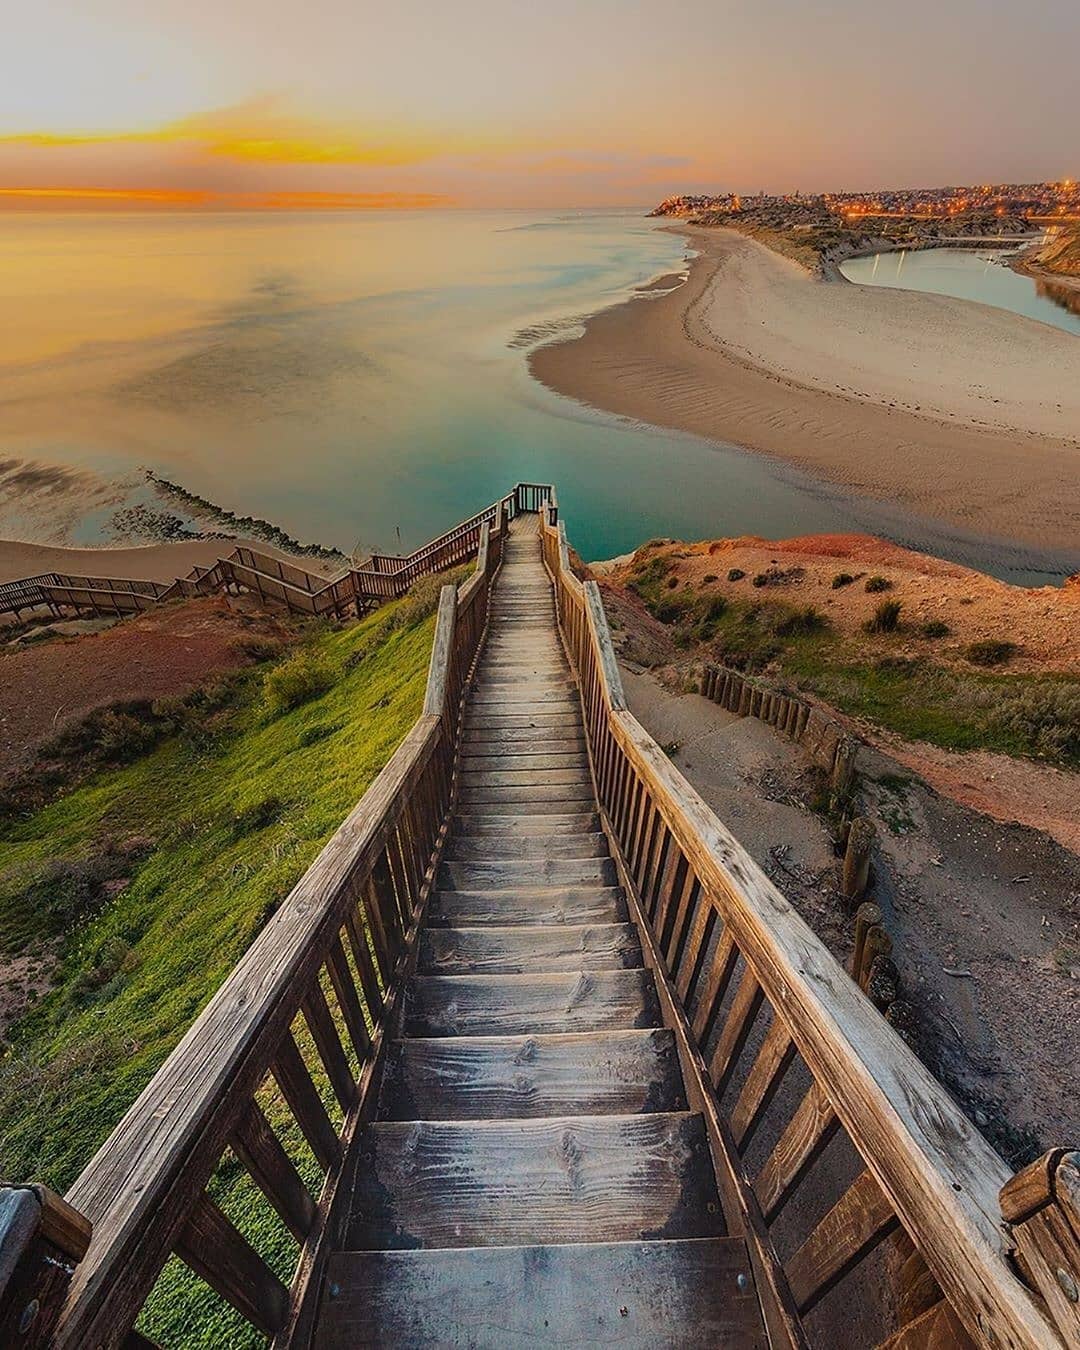 Reposted from @exploringaustralia_ -  Tonight we bring you a new and magical capture of one of our team’s favourite places in the country and maybe even on the planet, the Port Noarlunga staircase 😍 This view really makes you feeling like you’re about to step into another world of beauty and peace 💕 📷 @flowcreator
.
.
#exploringaus #exploringaustralia #exploringourglobe #exploreaustralia #aus #australia #australian #exploring #explorer #explore #seeaustralia #australiagram #westernaustralia #southaustralia #queensland #newsouthwales #victoria #tasmania #travelphotgraphy #roadtrip  #instatravel #travelgram #portnoarlunga #beach #staircase